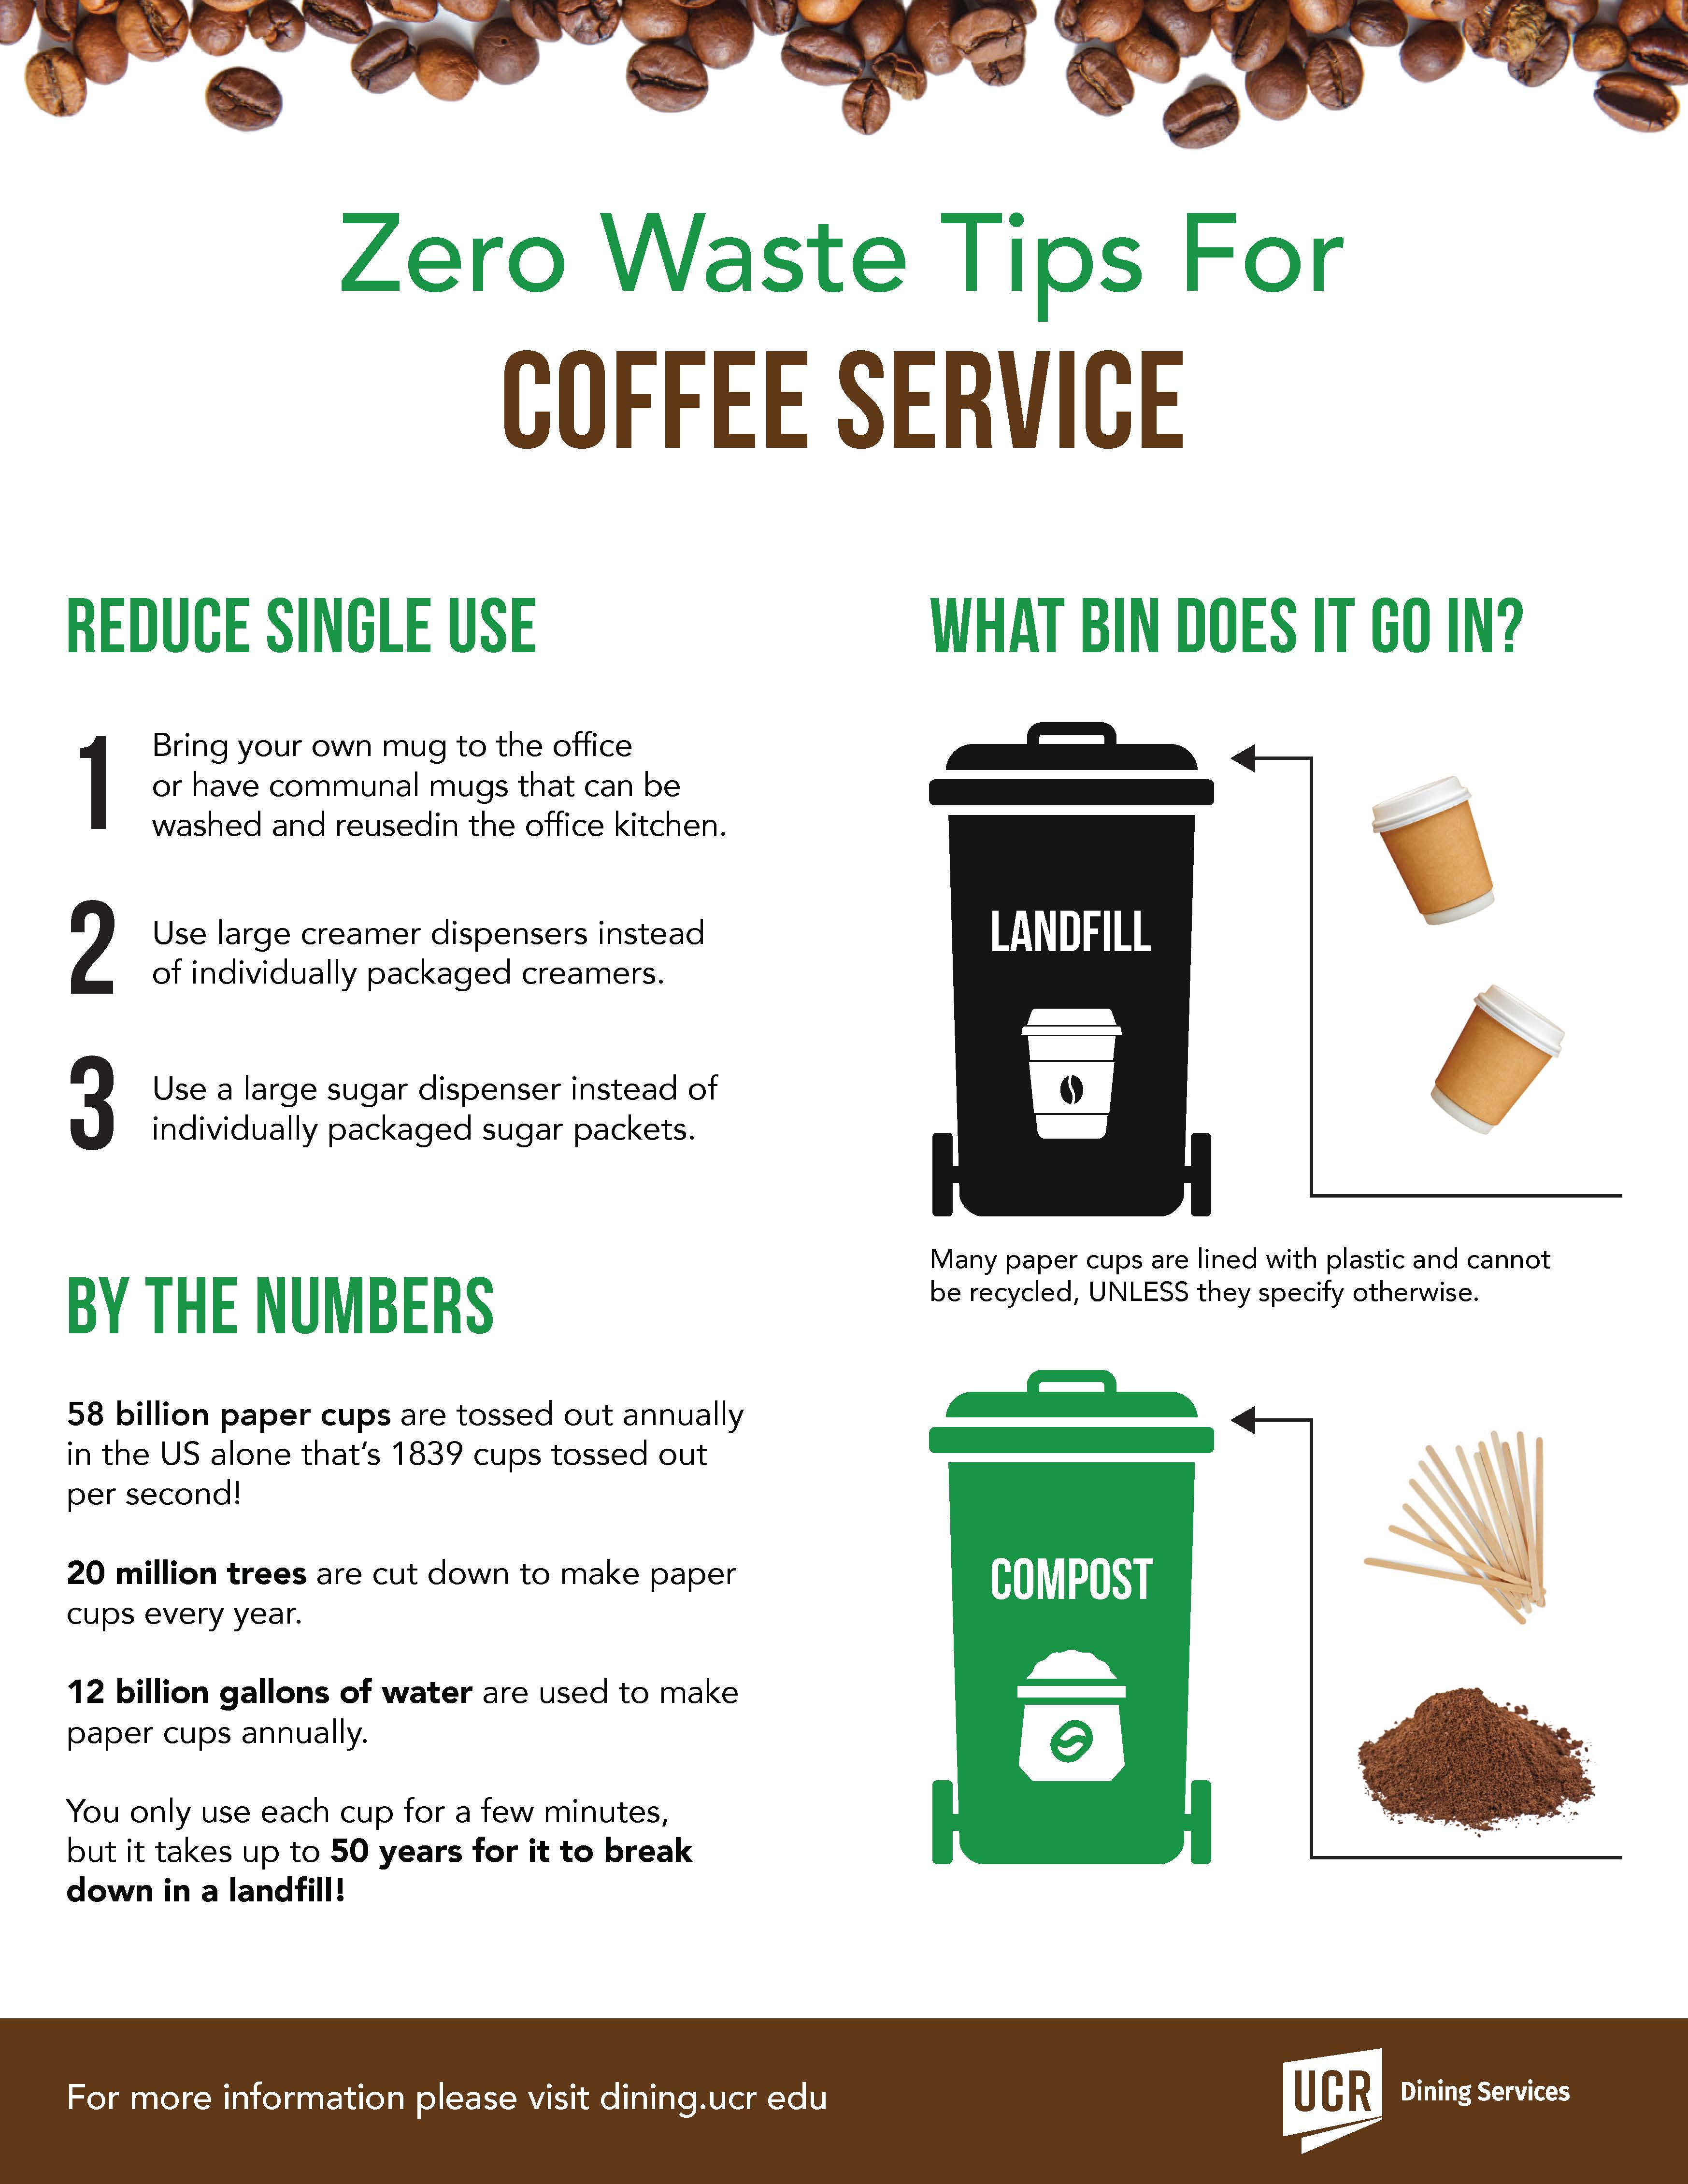 Zero Waste Tips for Coffee Service, Reduce Single Use